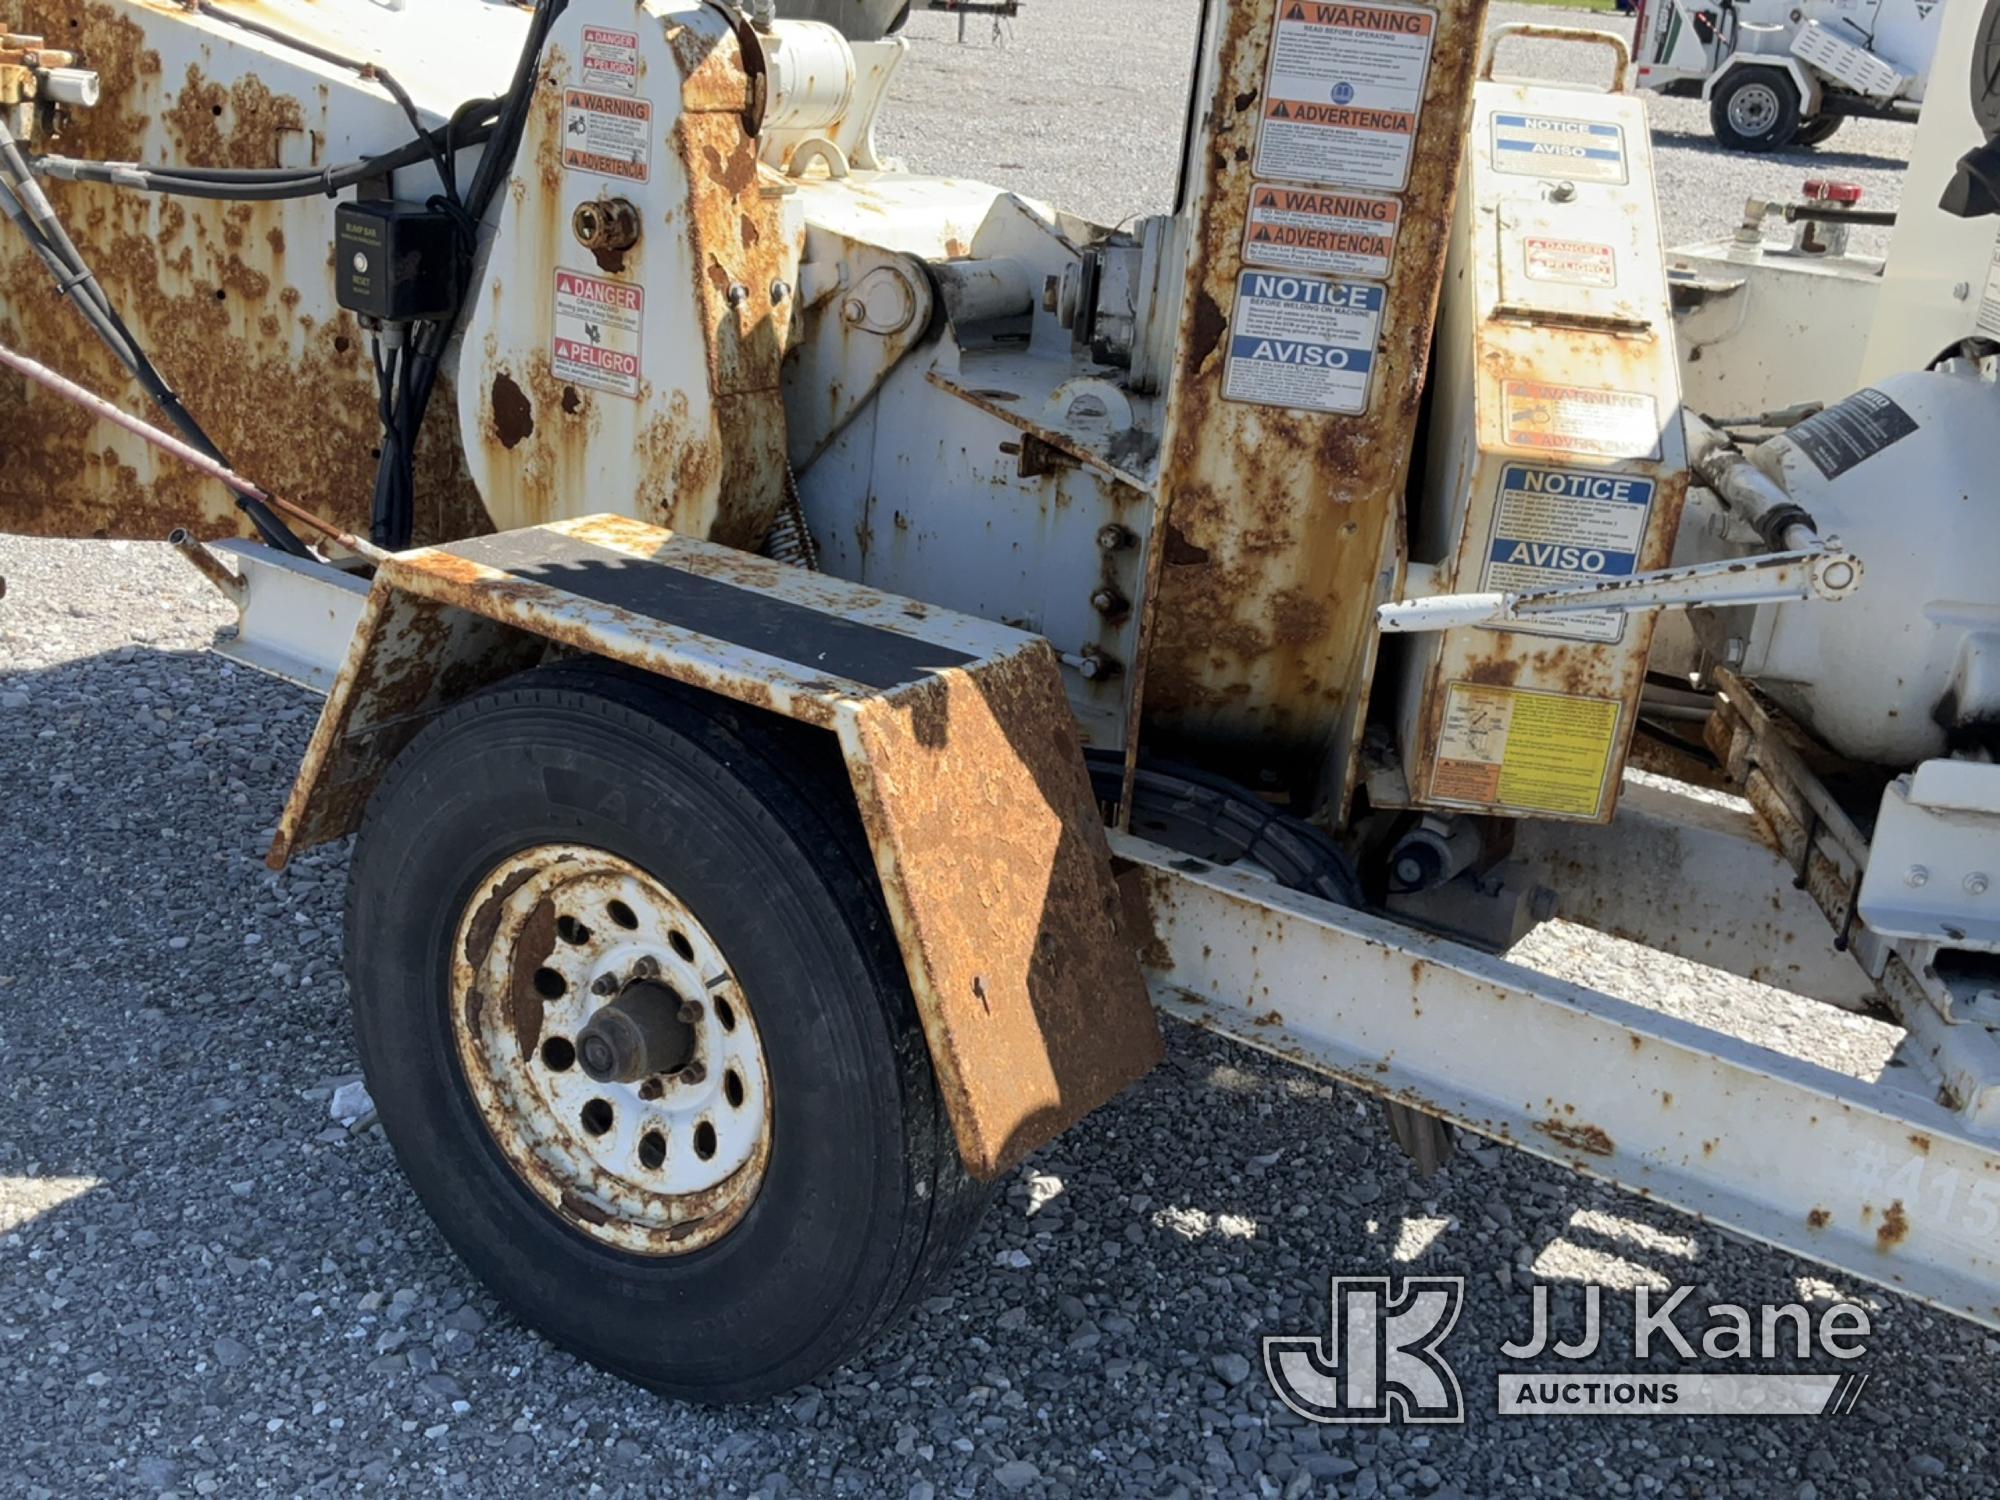 (Hawk Point, MO) 2016 Morbark M12D Chipper (12in Drum) No Title) (Runs & Operates) (Seller States: W